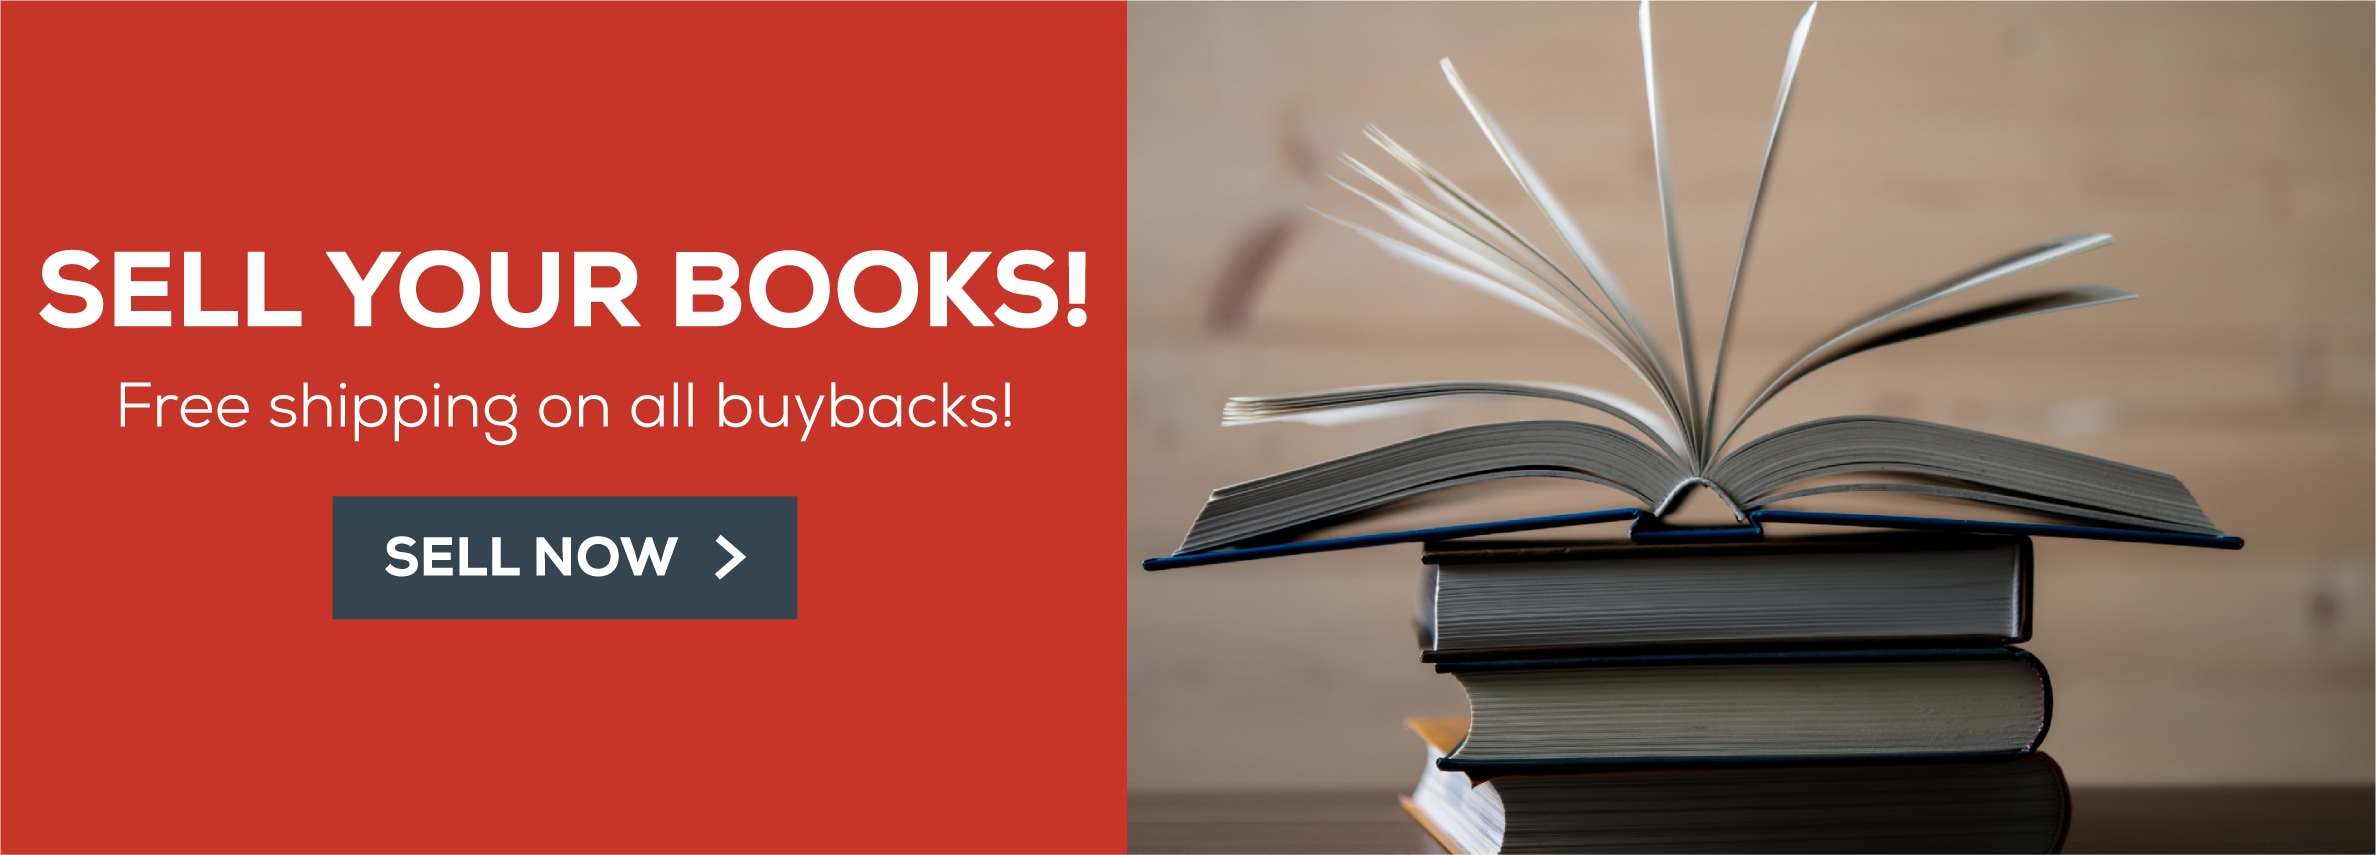 Sell your books online! Free shipping on all buybacks. Sell now.